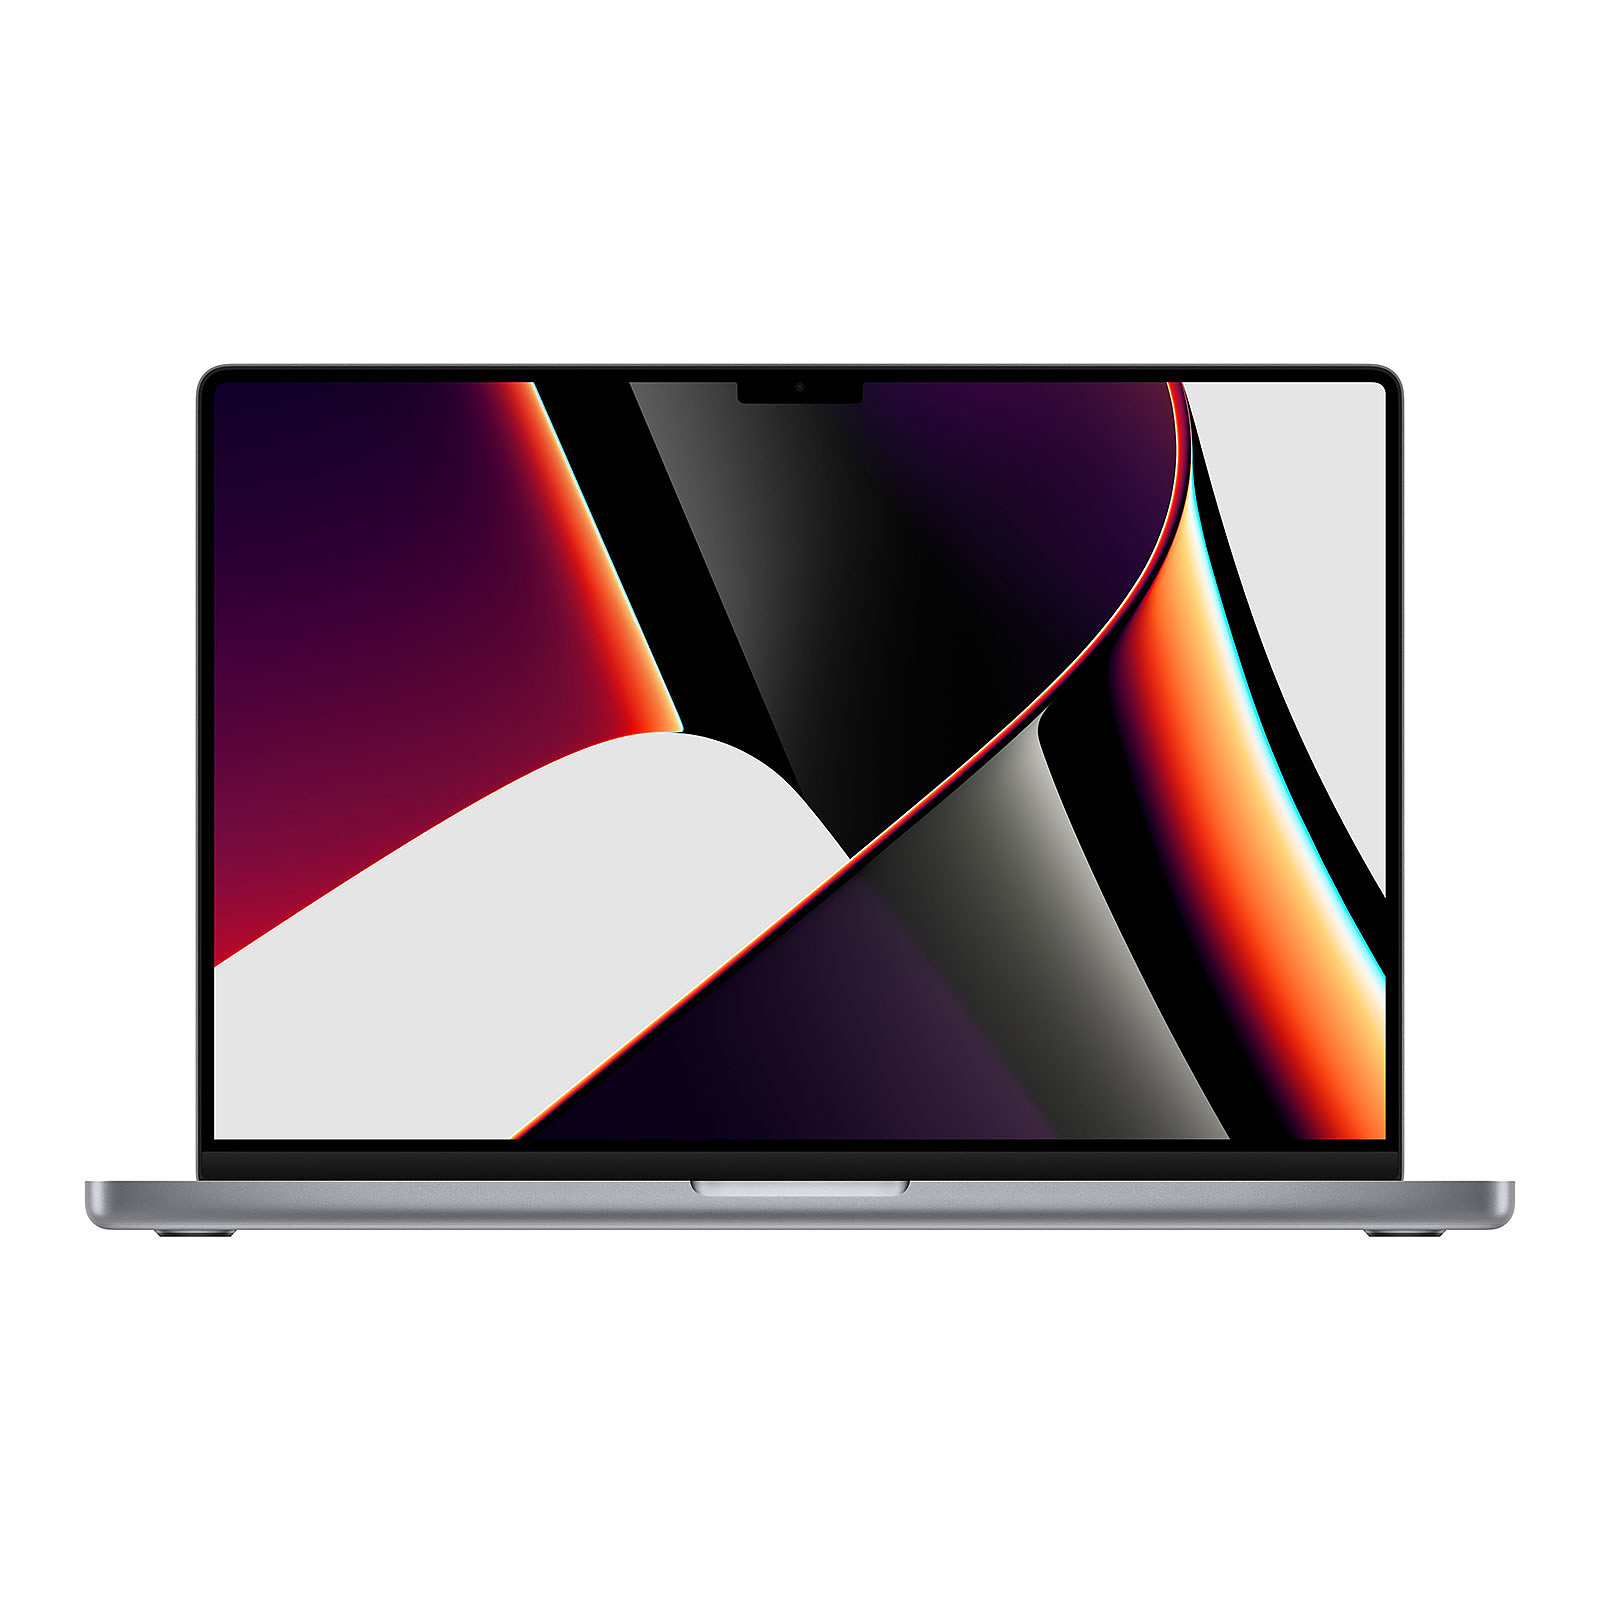 Apple MacBook Pro M1 Pro (2021) 16" Gris sideral 16Go/512Go (MK183FN/A-QWERTY) - MacBook Apple